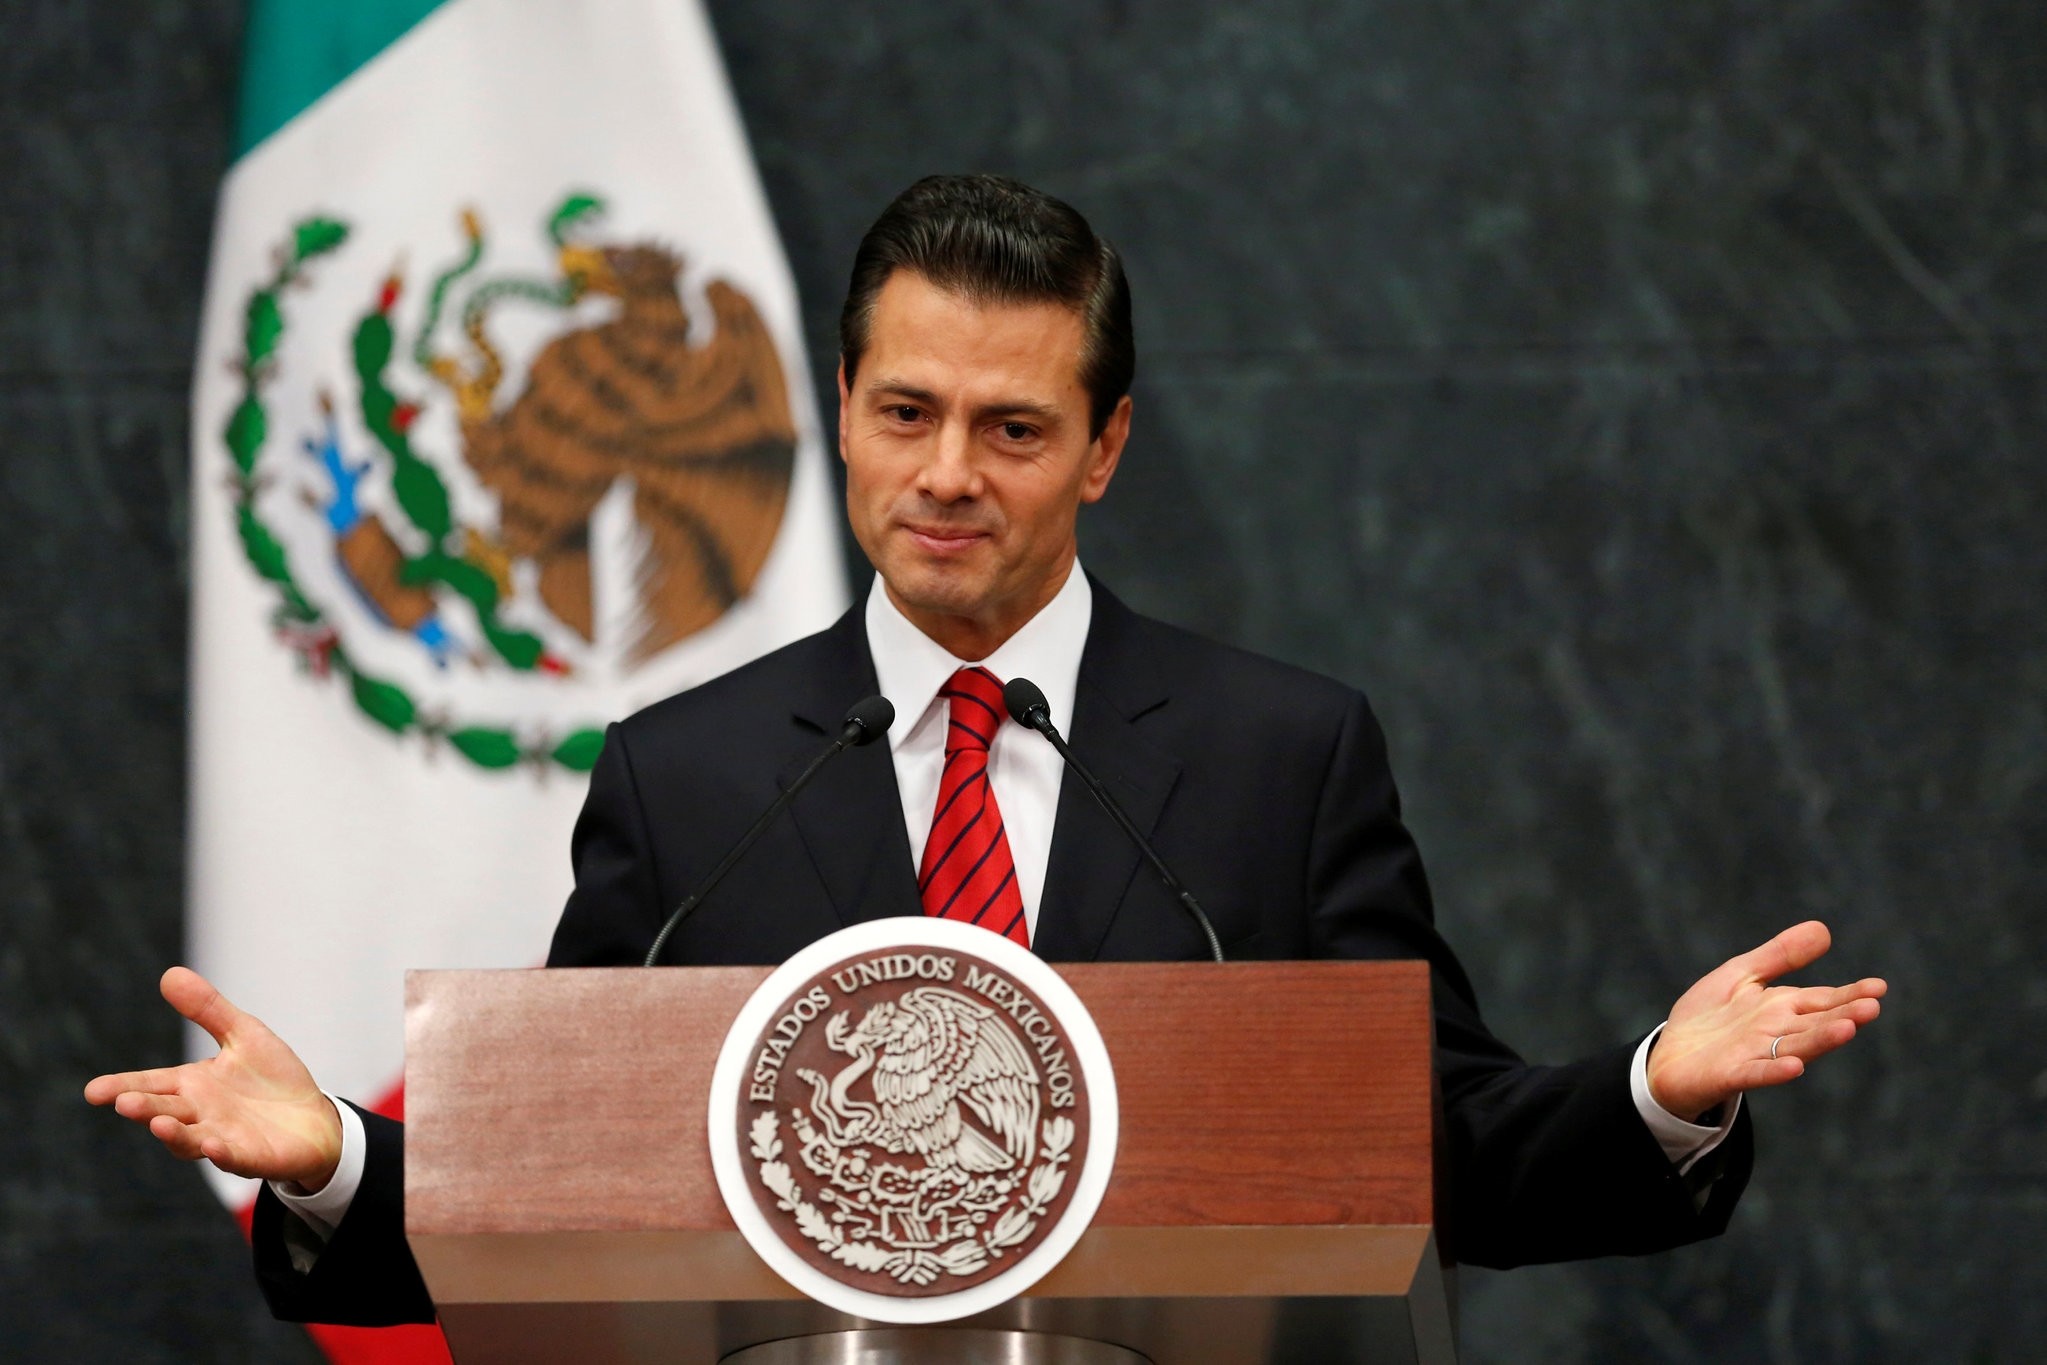 exico's President Enrique Pena Nieto delivers a message after U.S. Republican candidate Donald Trump won an unexpected victory in the presidential election. (REUTERS Photo)